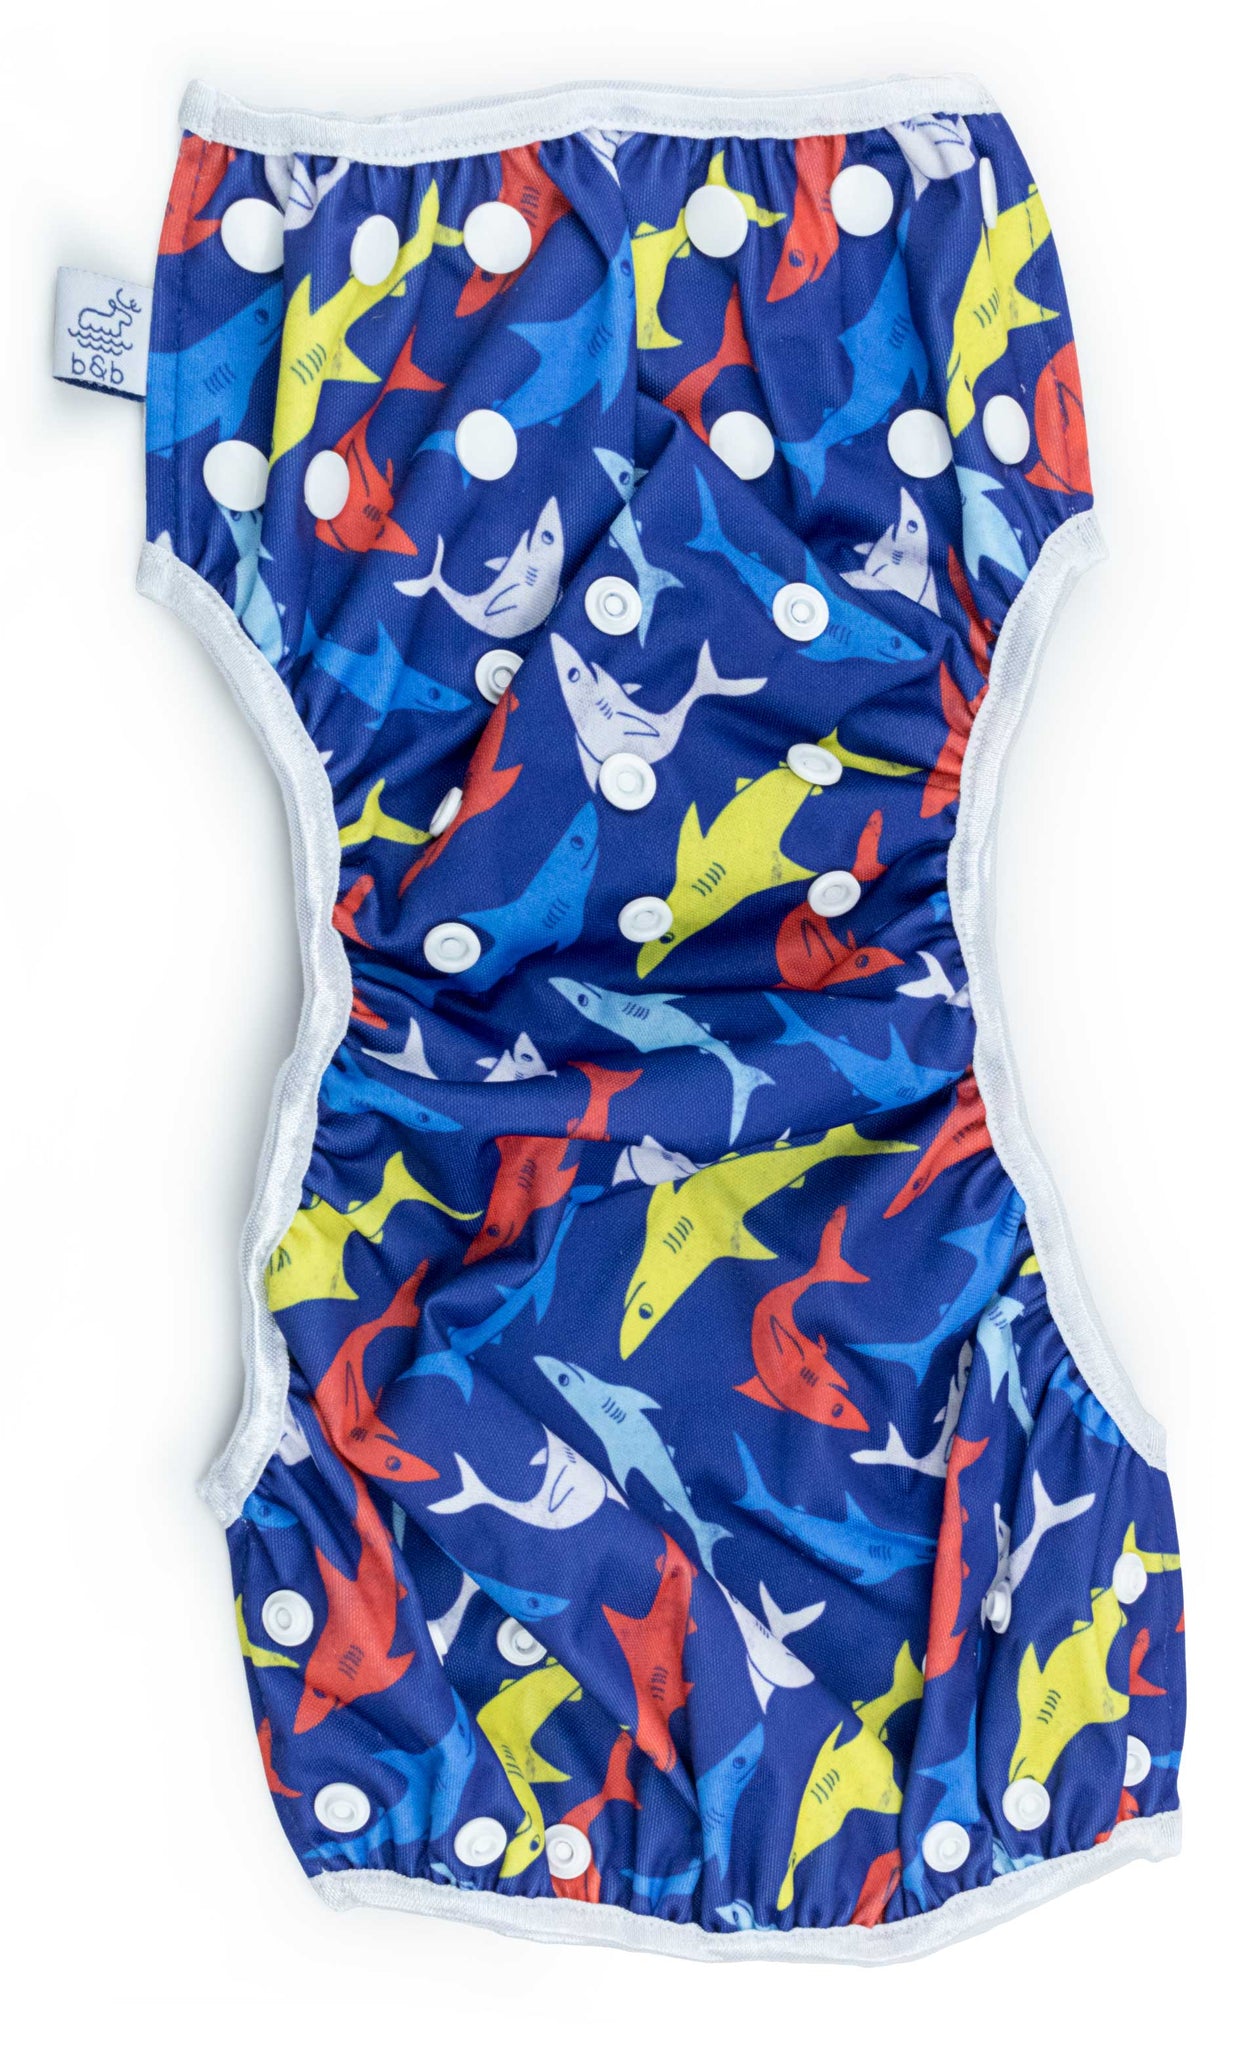 Beau and Belle Littles Swim Diaper, Regular Size, dark blue with sharks, unbuttoned and laid flat